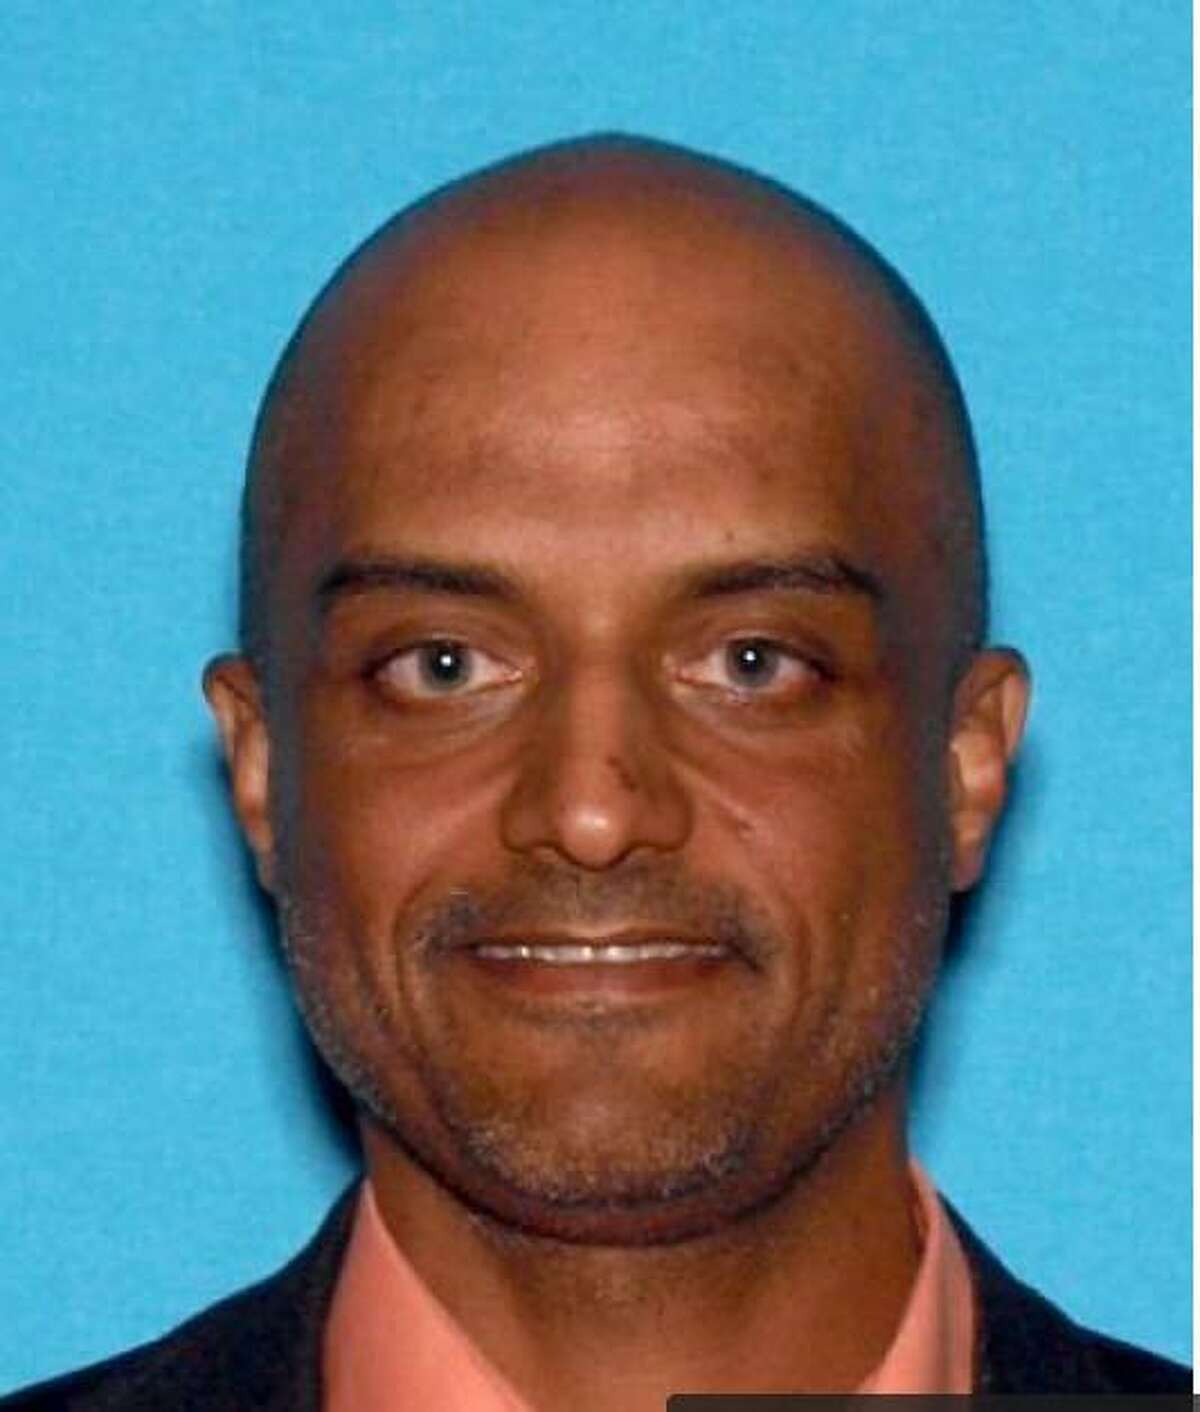 Santa Cruz County sheriff's officials said Tushar Atre was kidnapped from his home around 3 a.m. Tuesday. A body and a car associated with the case was found but authorities have not said if it is Atre.